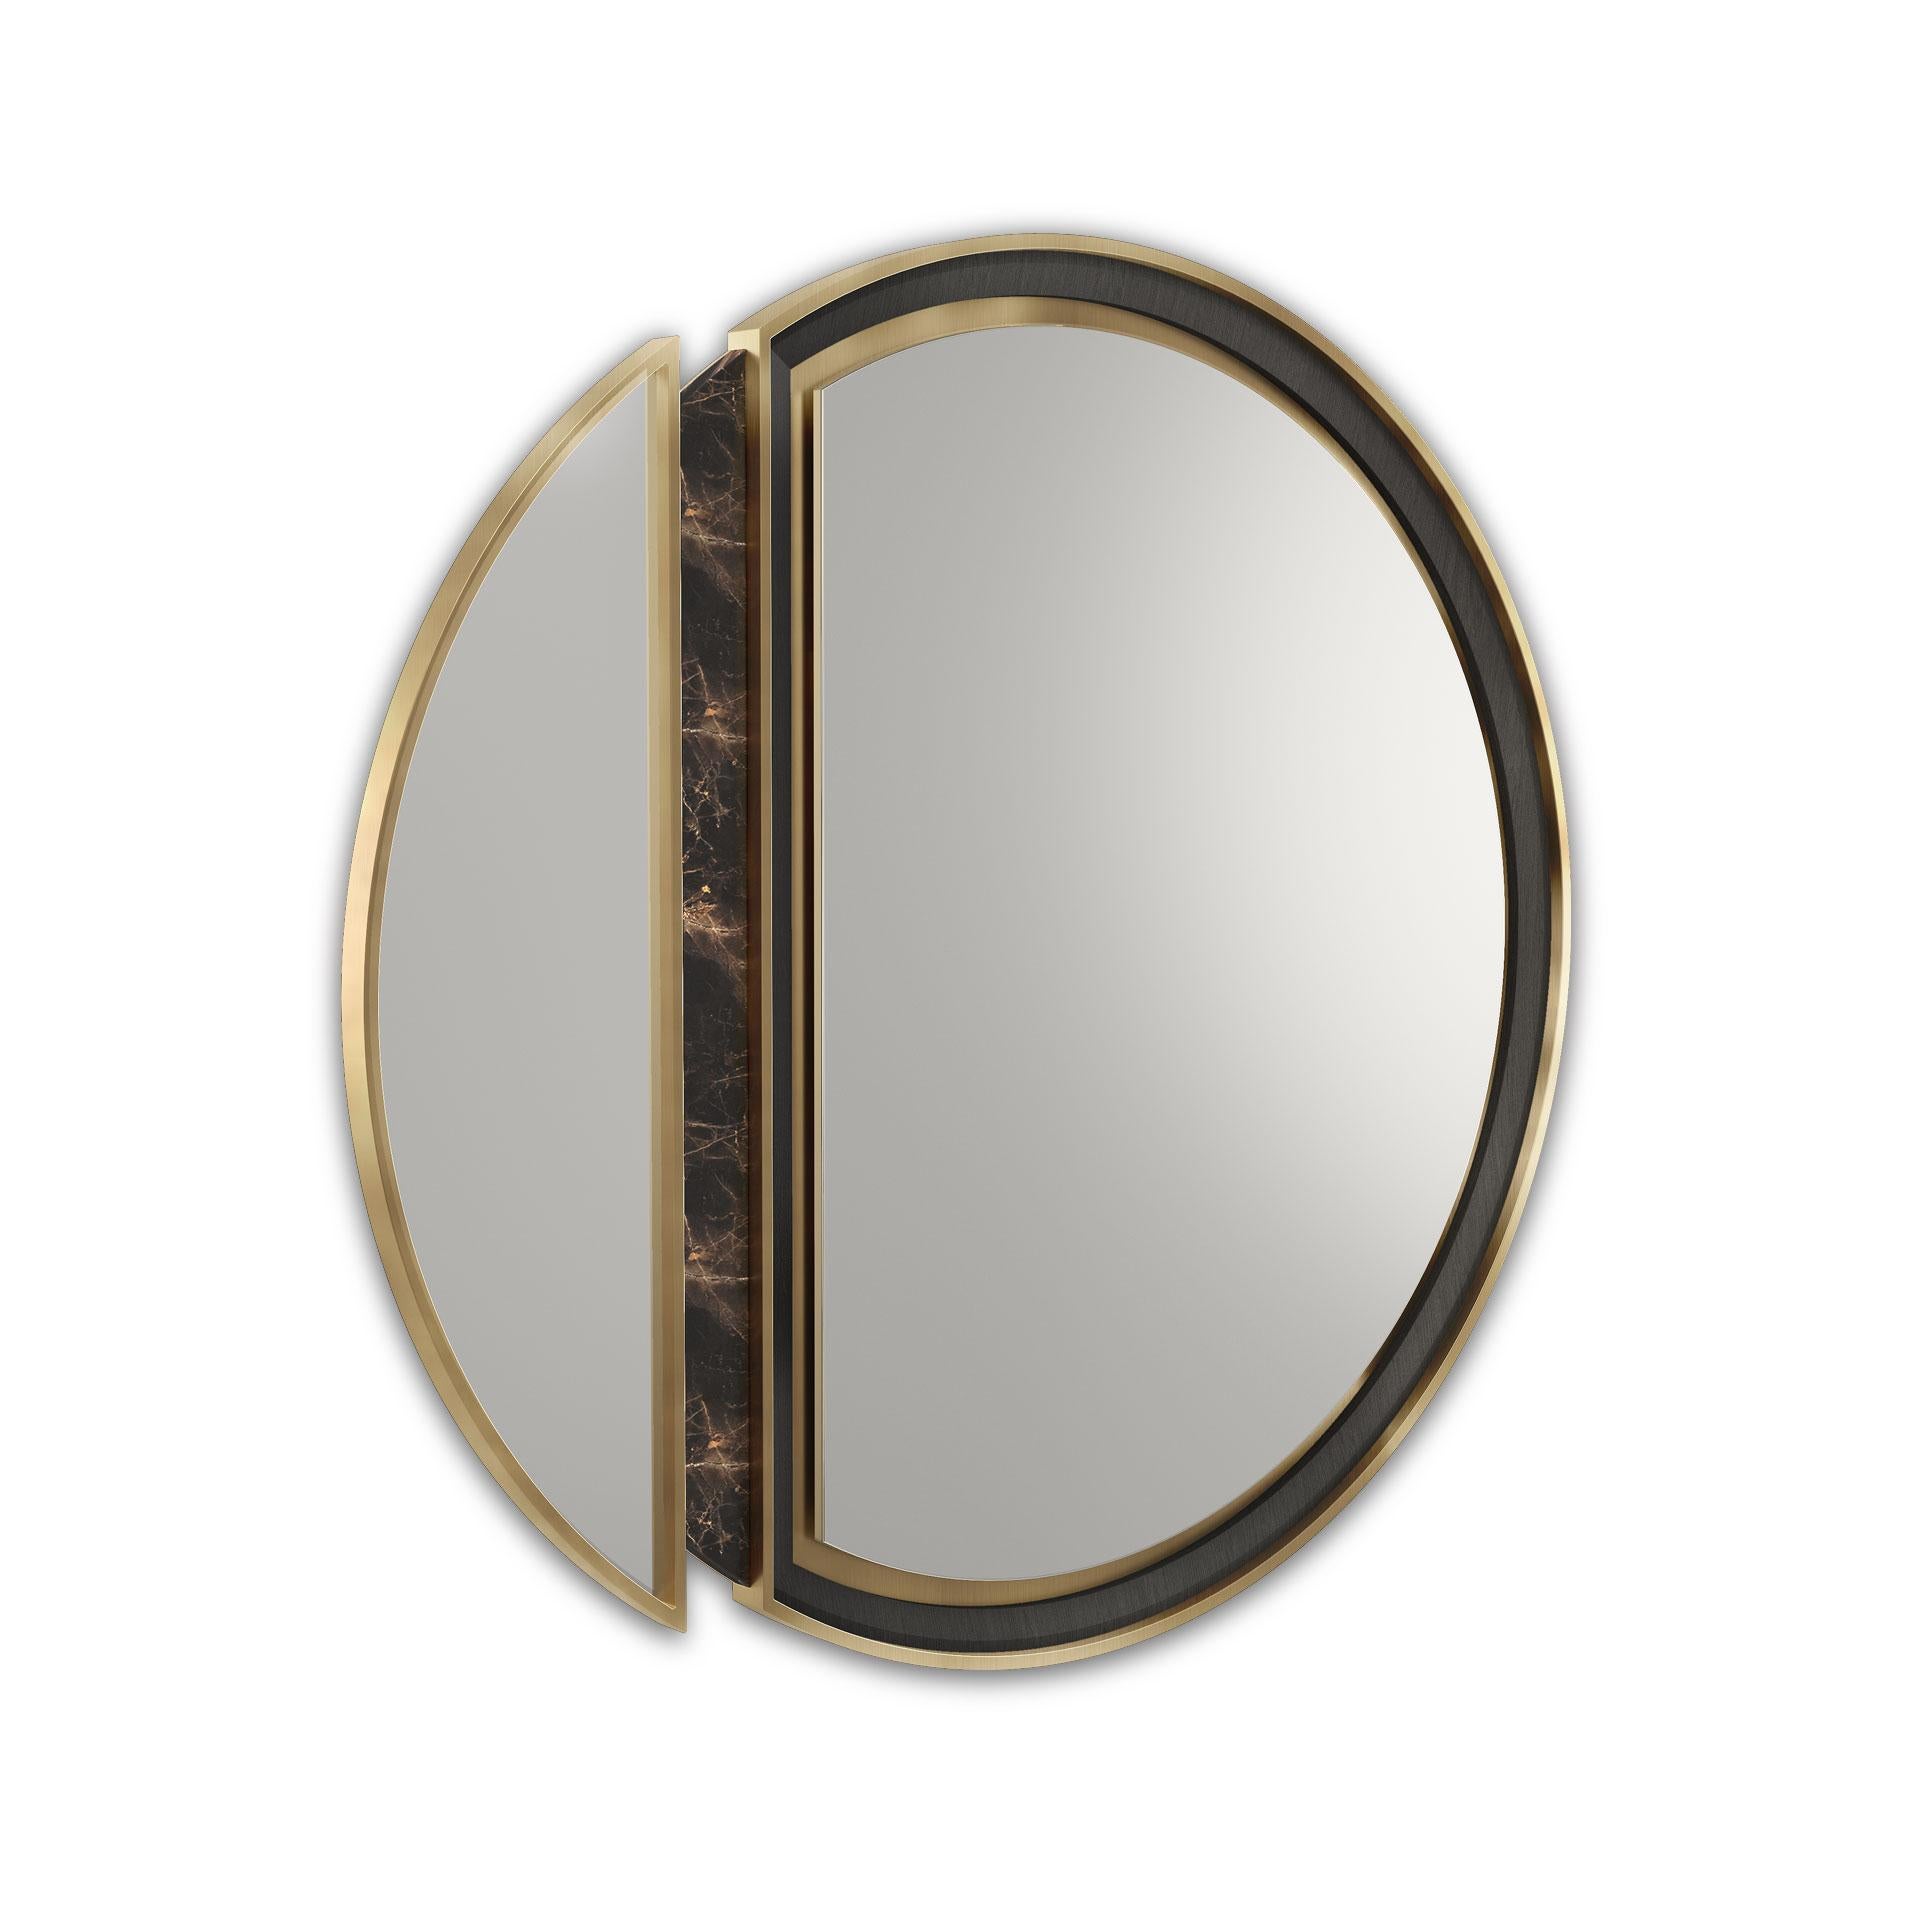 Known for being the state with more lakes, Alaska offers picturesque waters at every turn. And for sure it demands everyone's attention. Inspired by reflection on the extensions of Alaska's lakes, Porus Studio designers conceived the Alaska mirror.